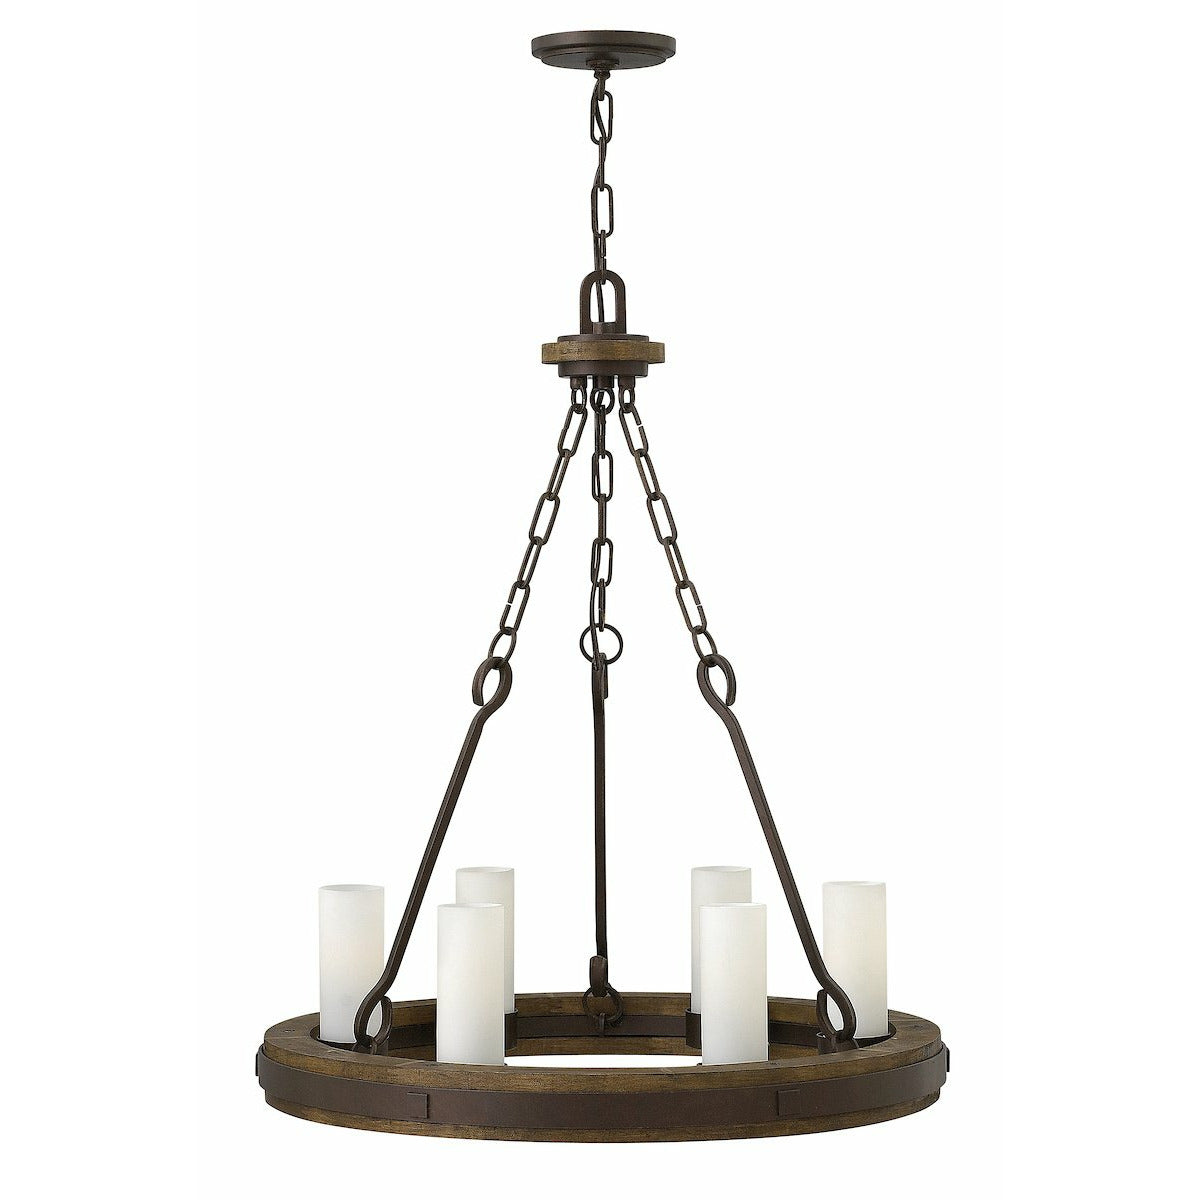 CABOT Chandelier Rustic Iron*